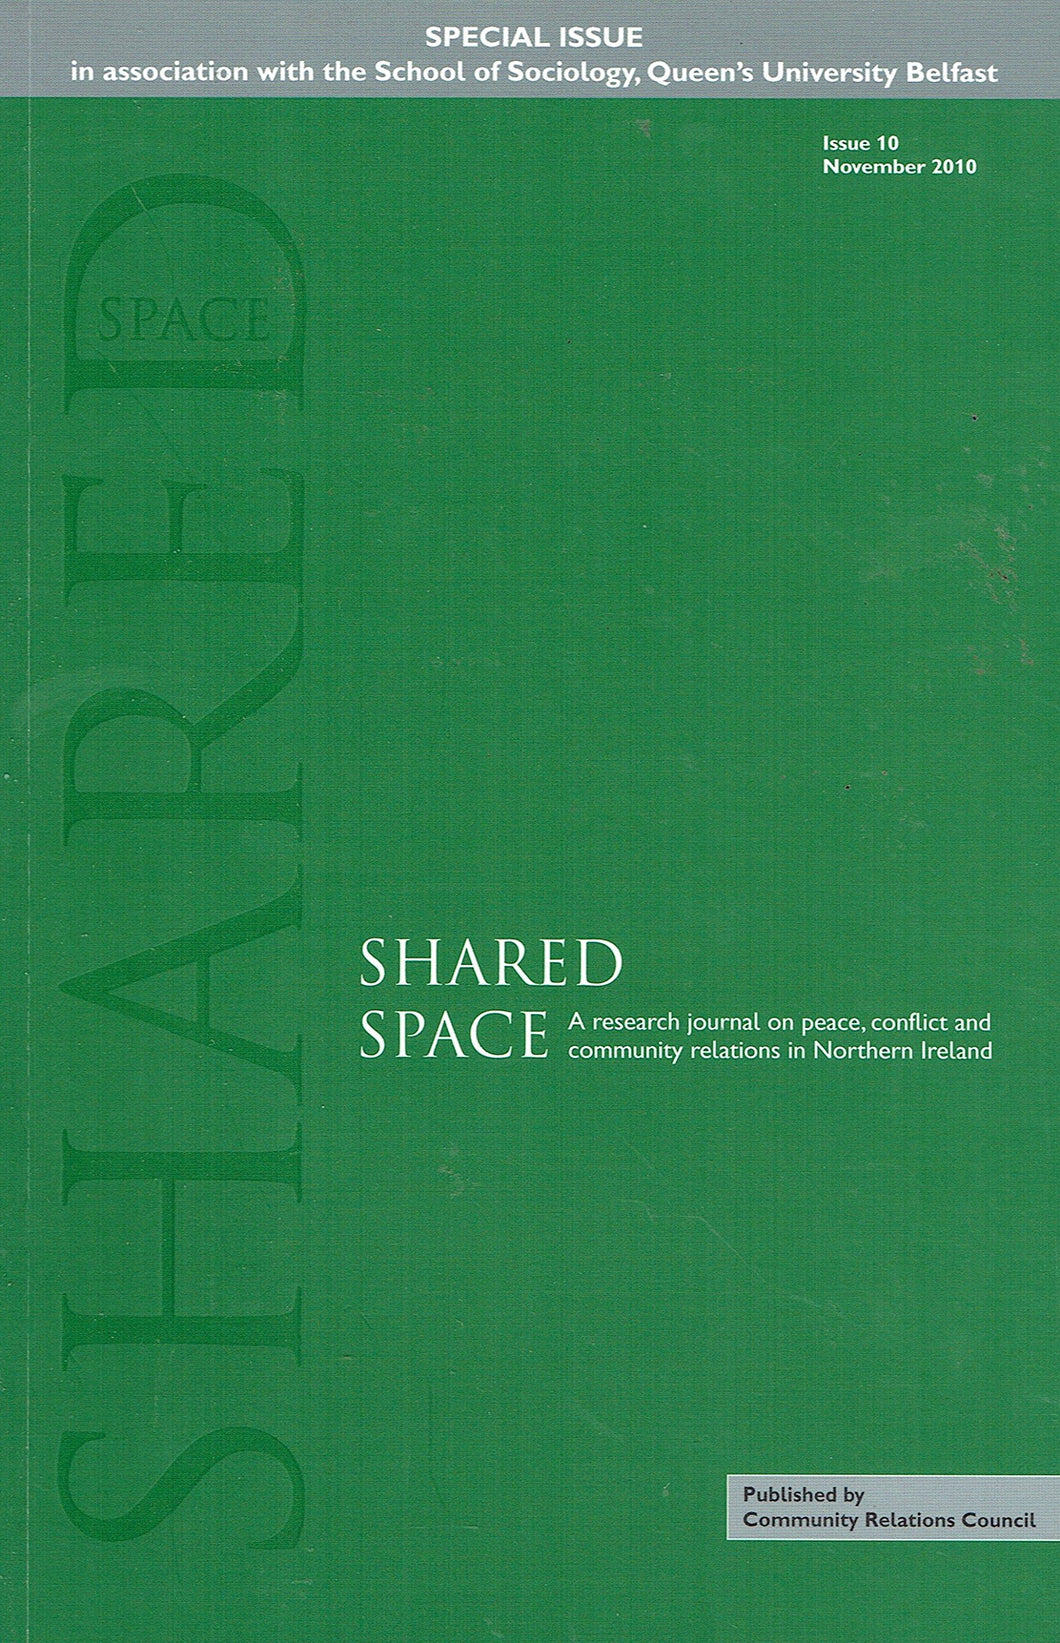 Shared Space: November 2010 Issue 10: A Research Journal on Peace, Conflict and Community Relations in Northern Ireland